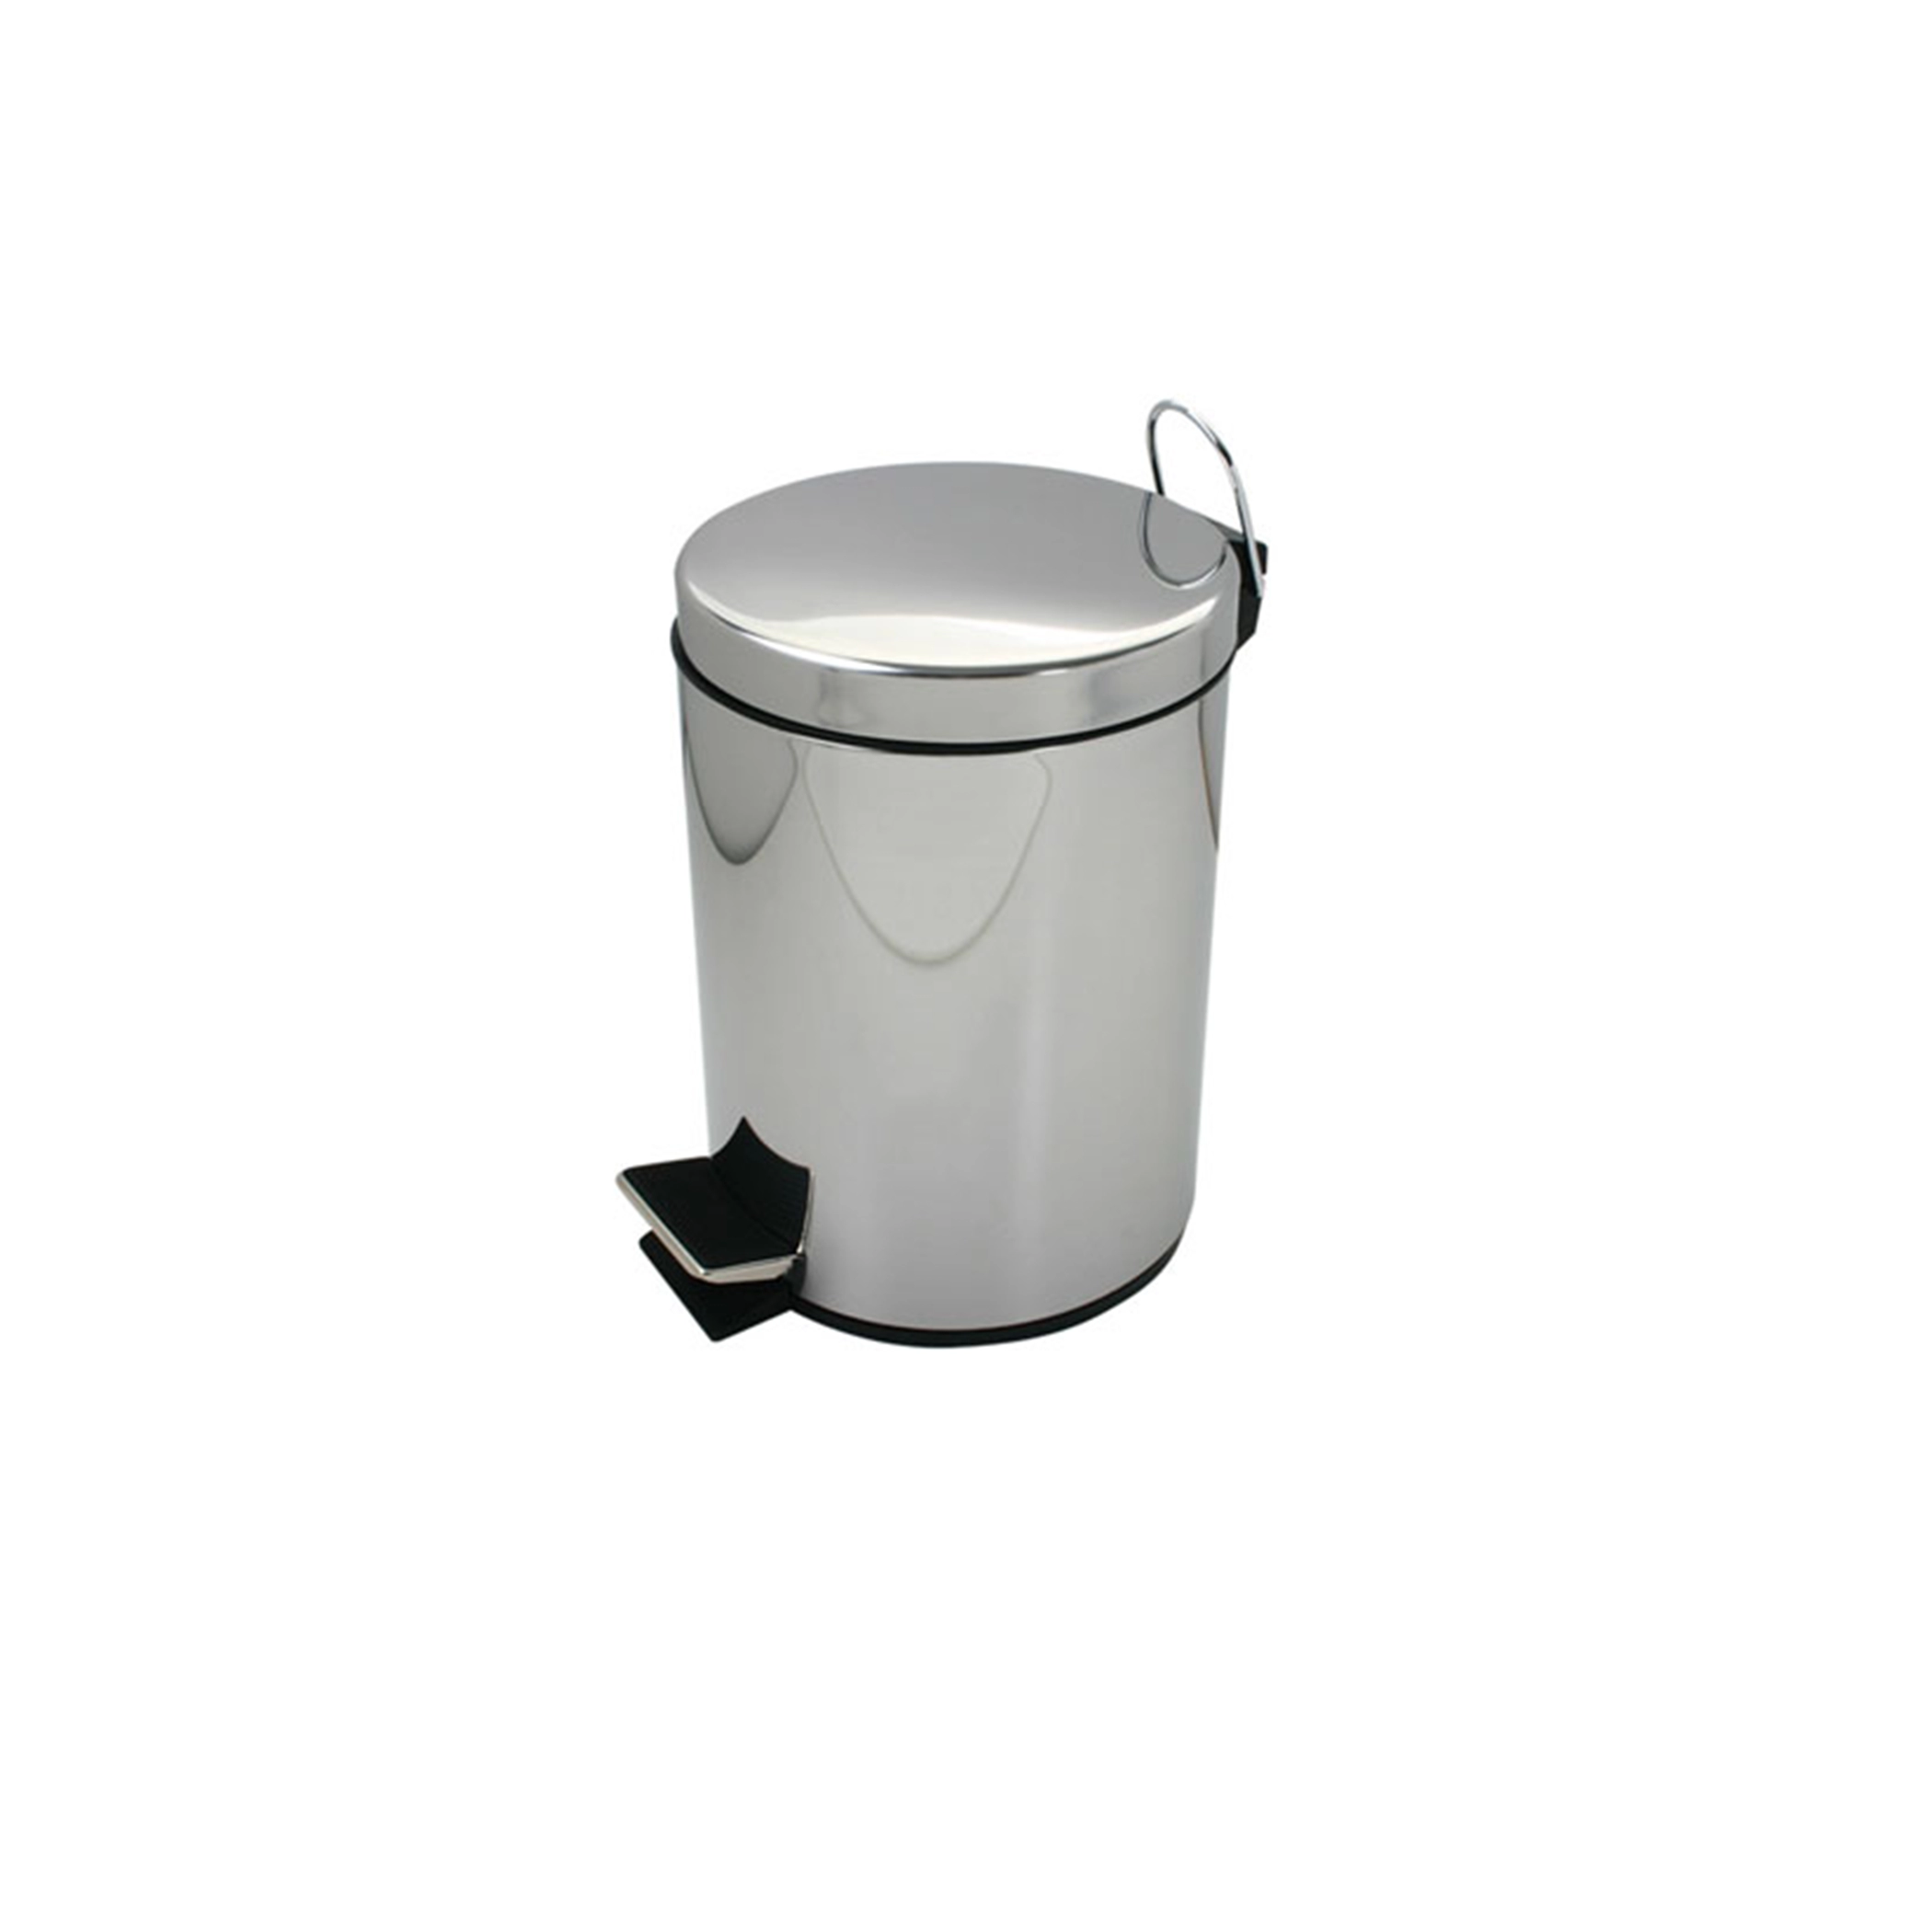 3L Stainless Steel Trash Cans With Lids